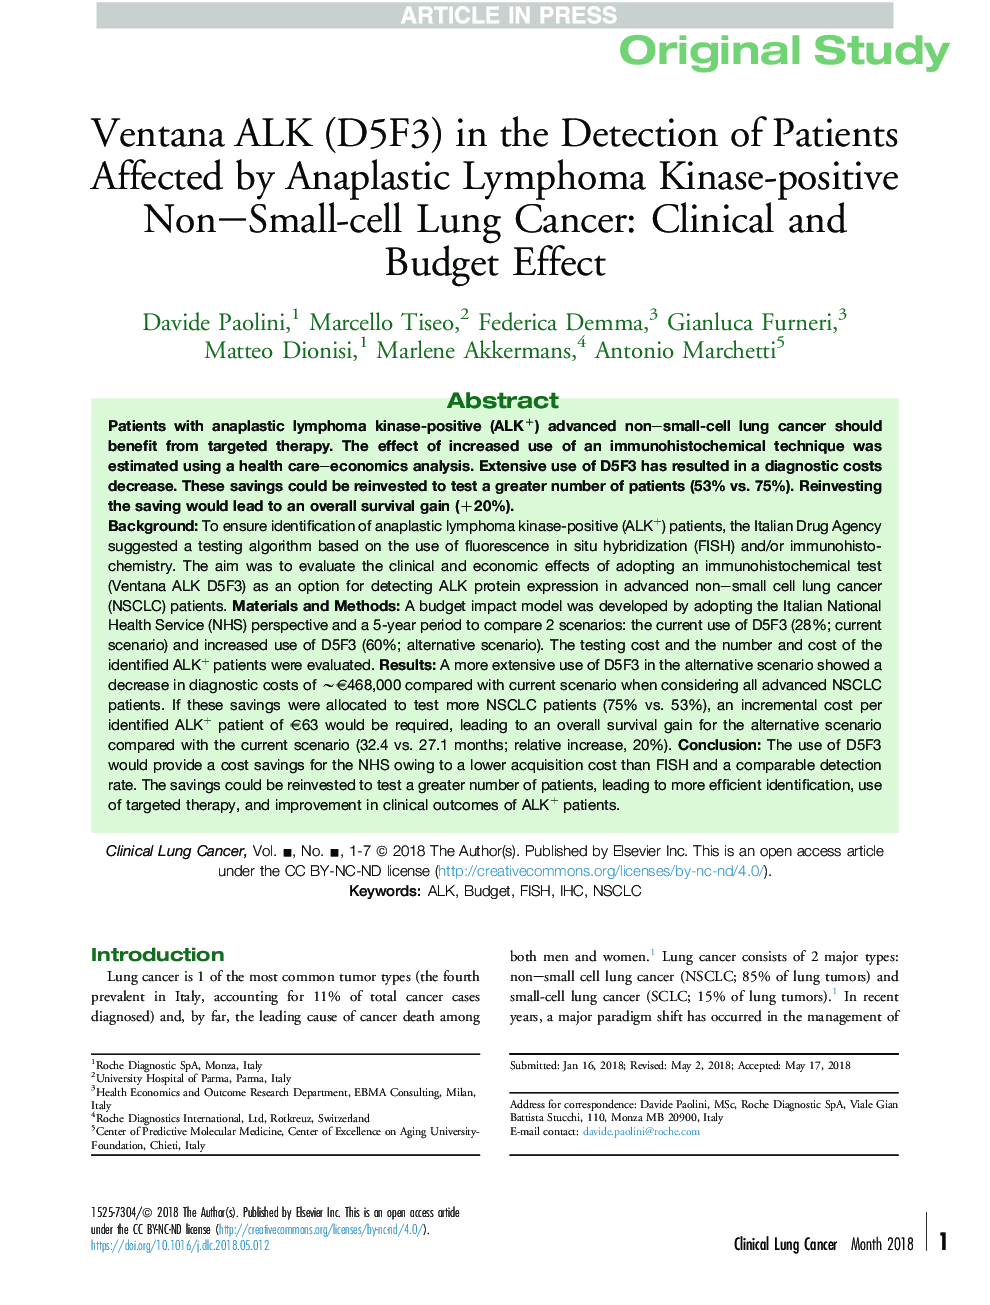 Ventana ALK (D5F3) in the Detection of Patients Affected by Anaplastic Lymphoma Kinase-positive Non-Small-cell Lung Cancer: Clinical and Budget Effect